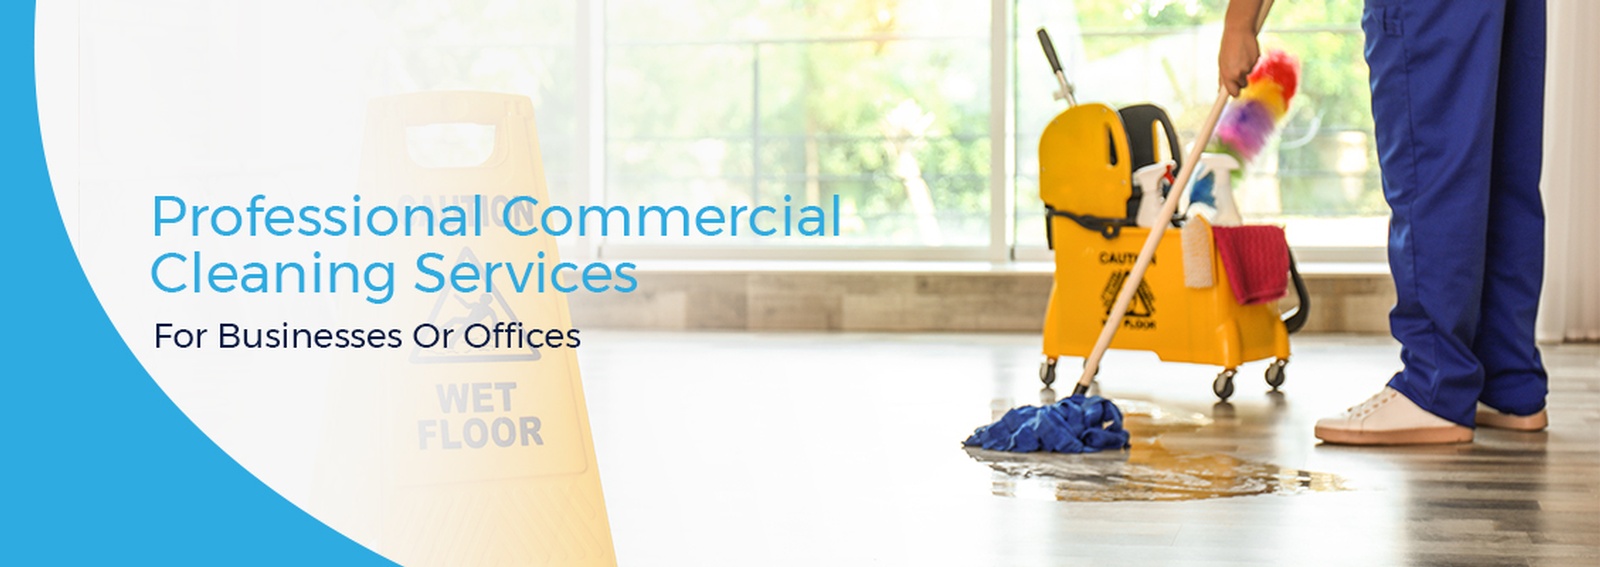 Commercial Cleaning Services in Hamilton, Ontario